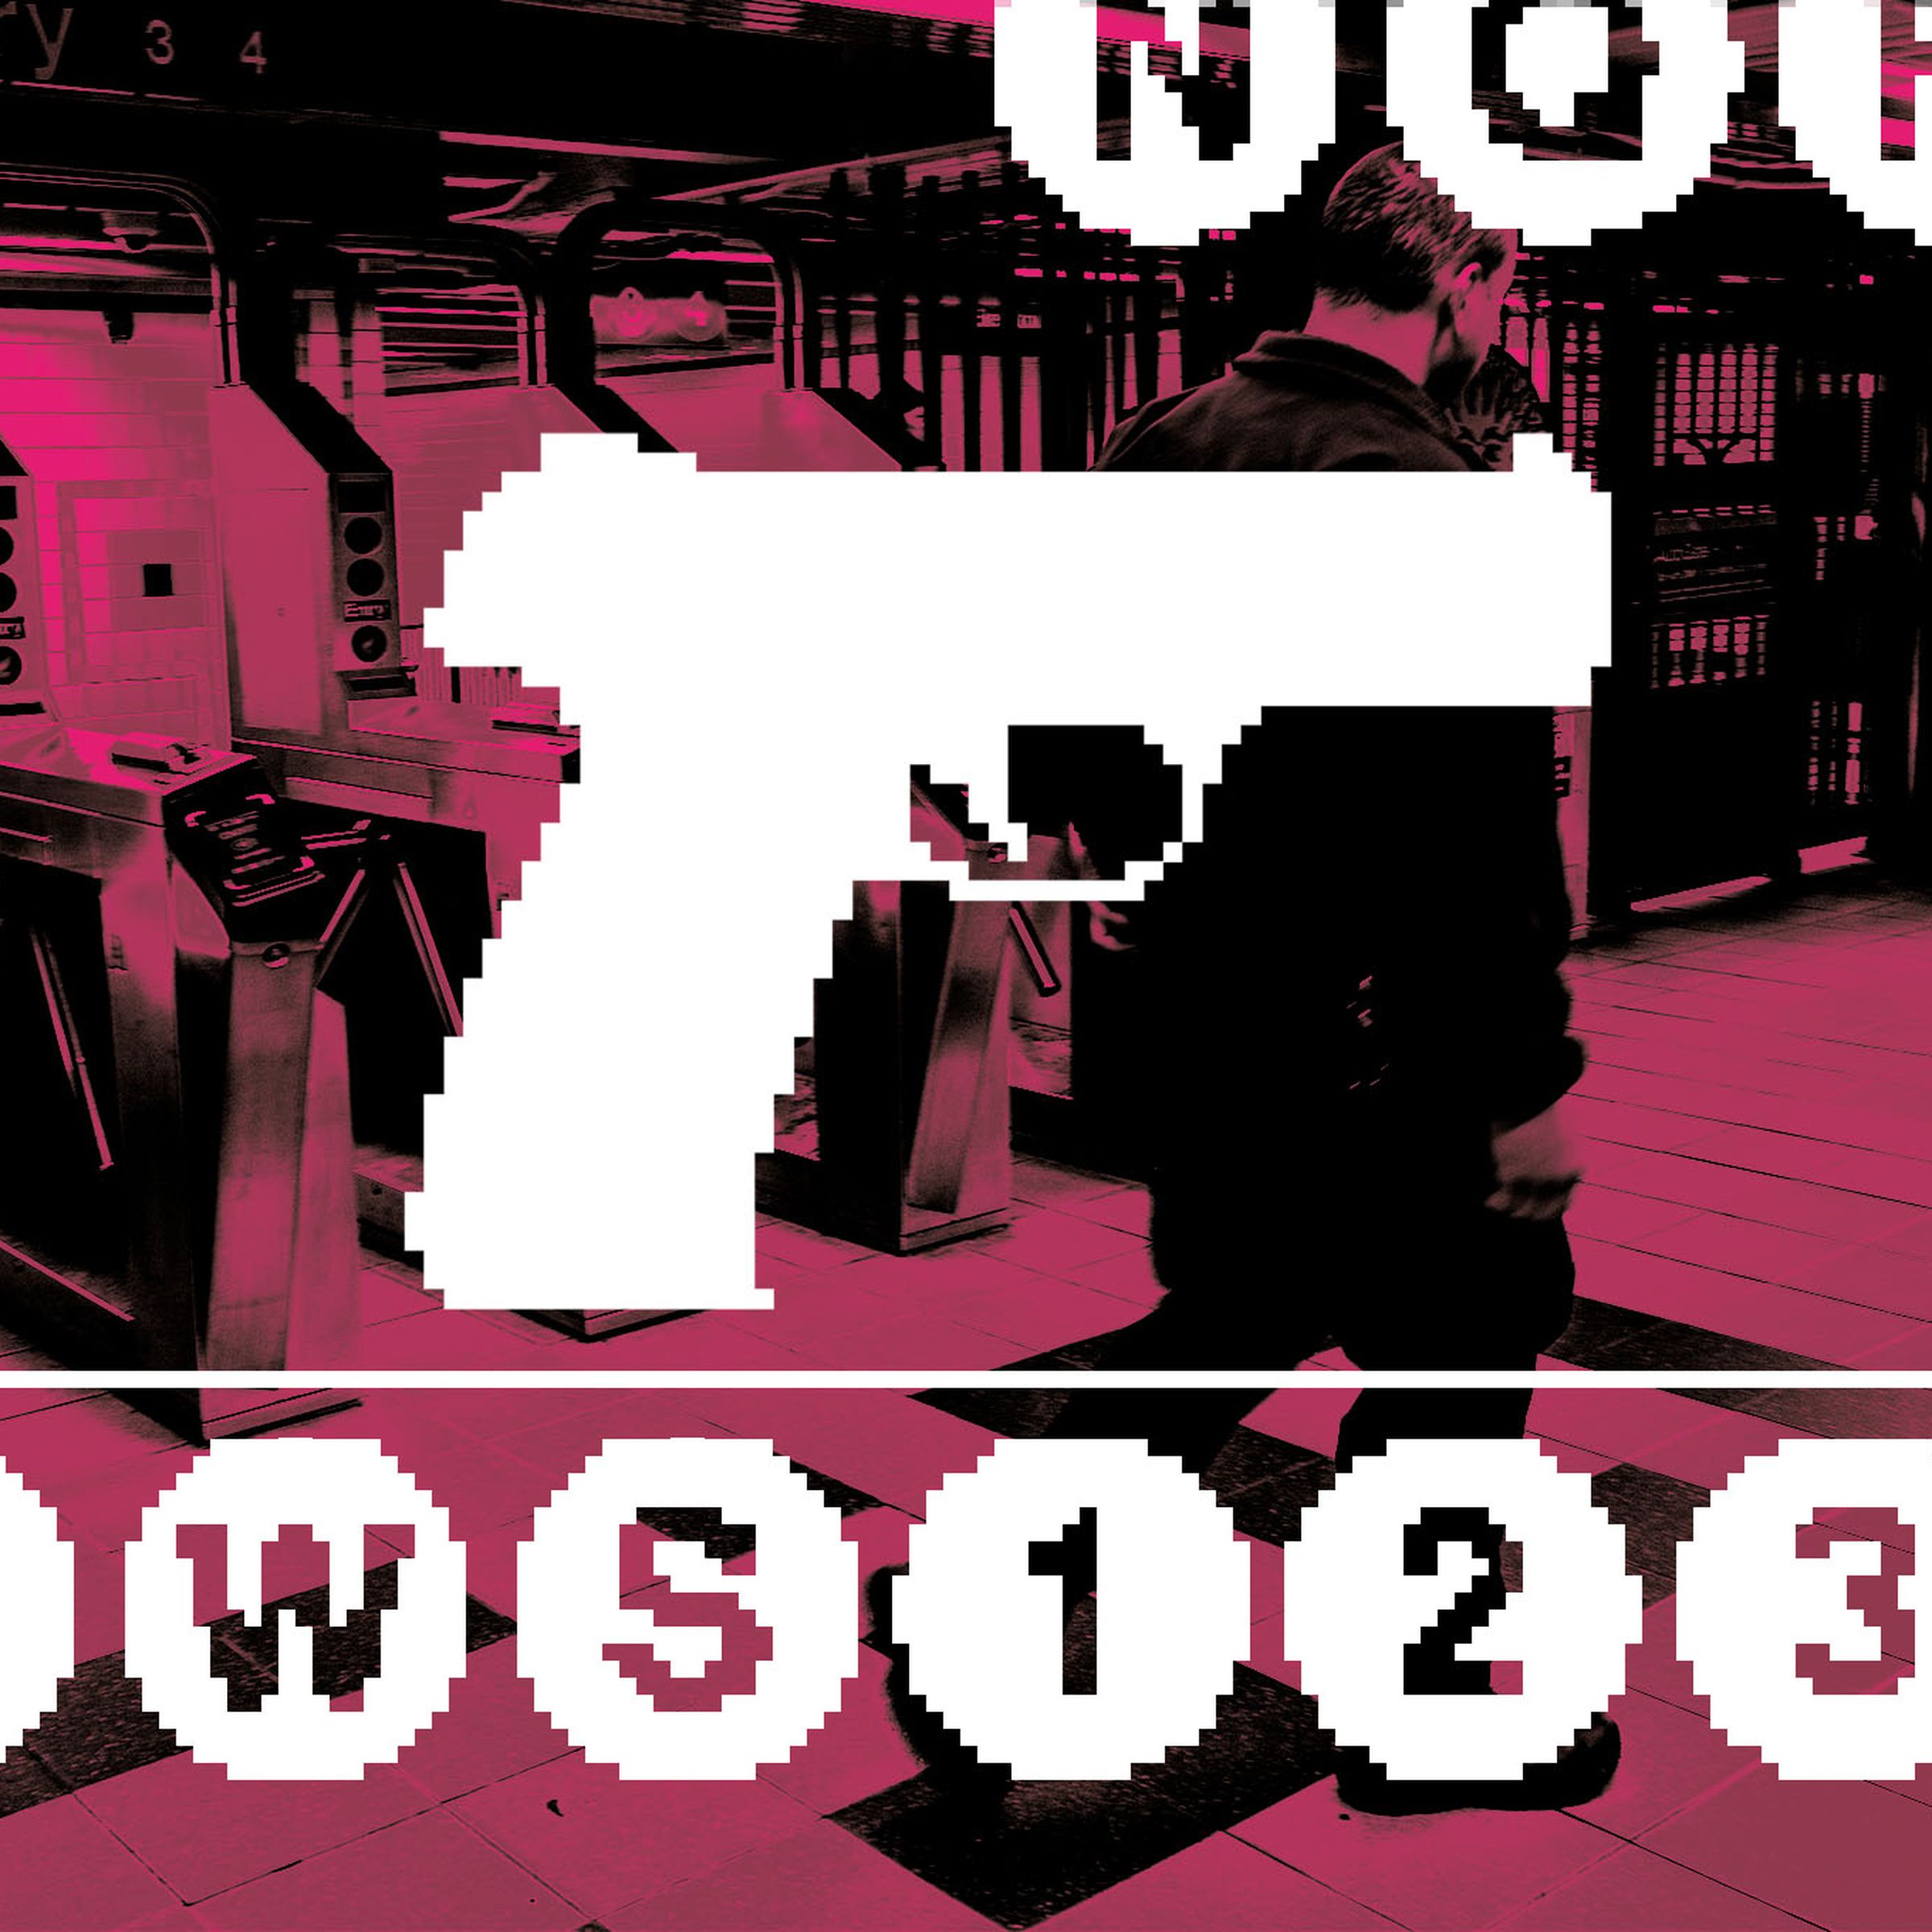 Photo illustration of an NYPD officer in a subway station behind a pixelated gun.